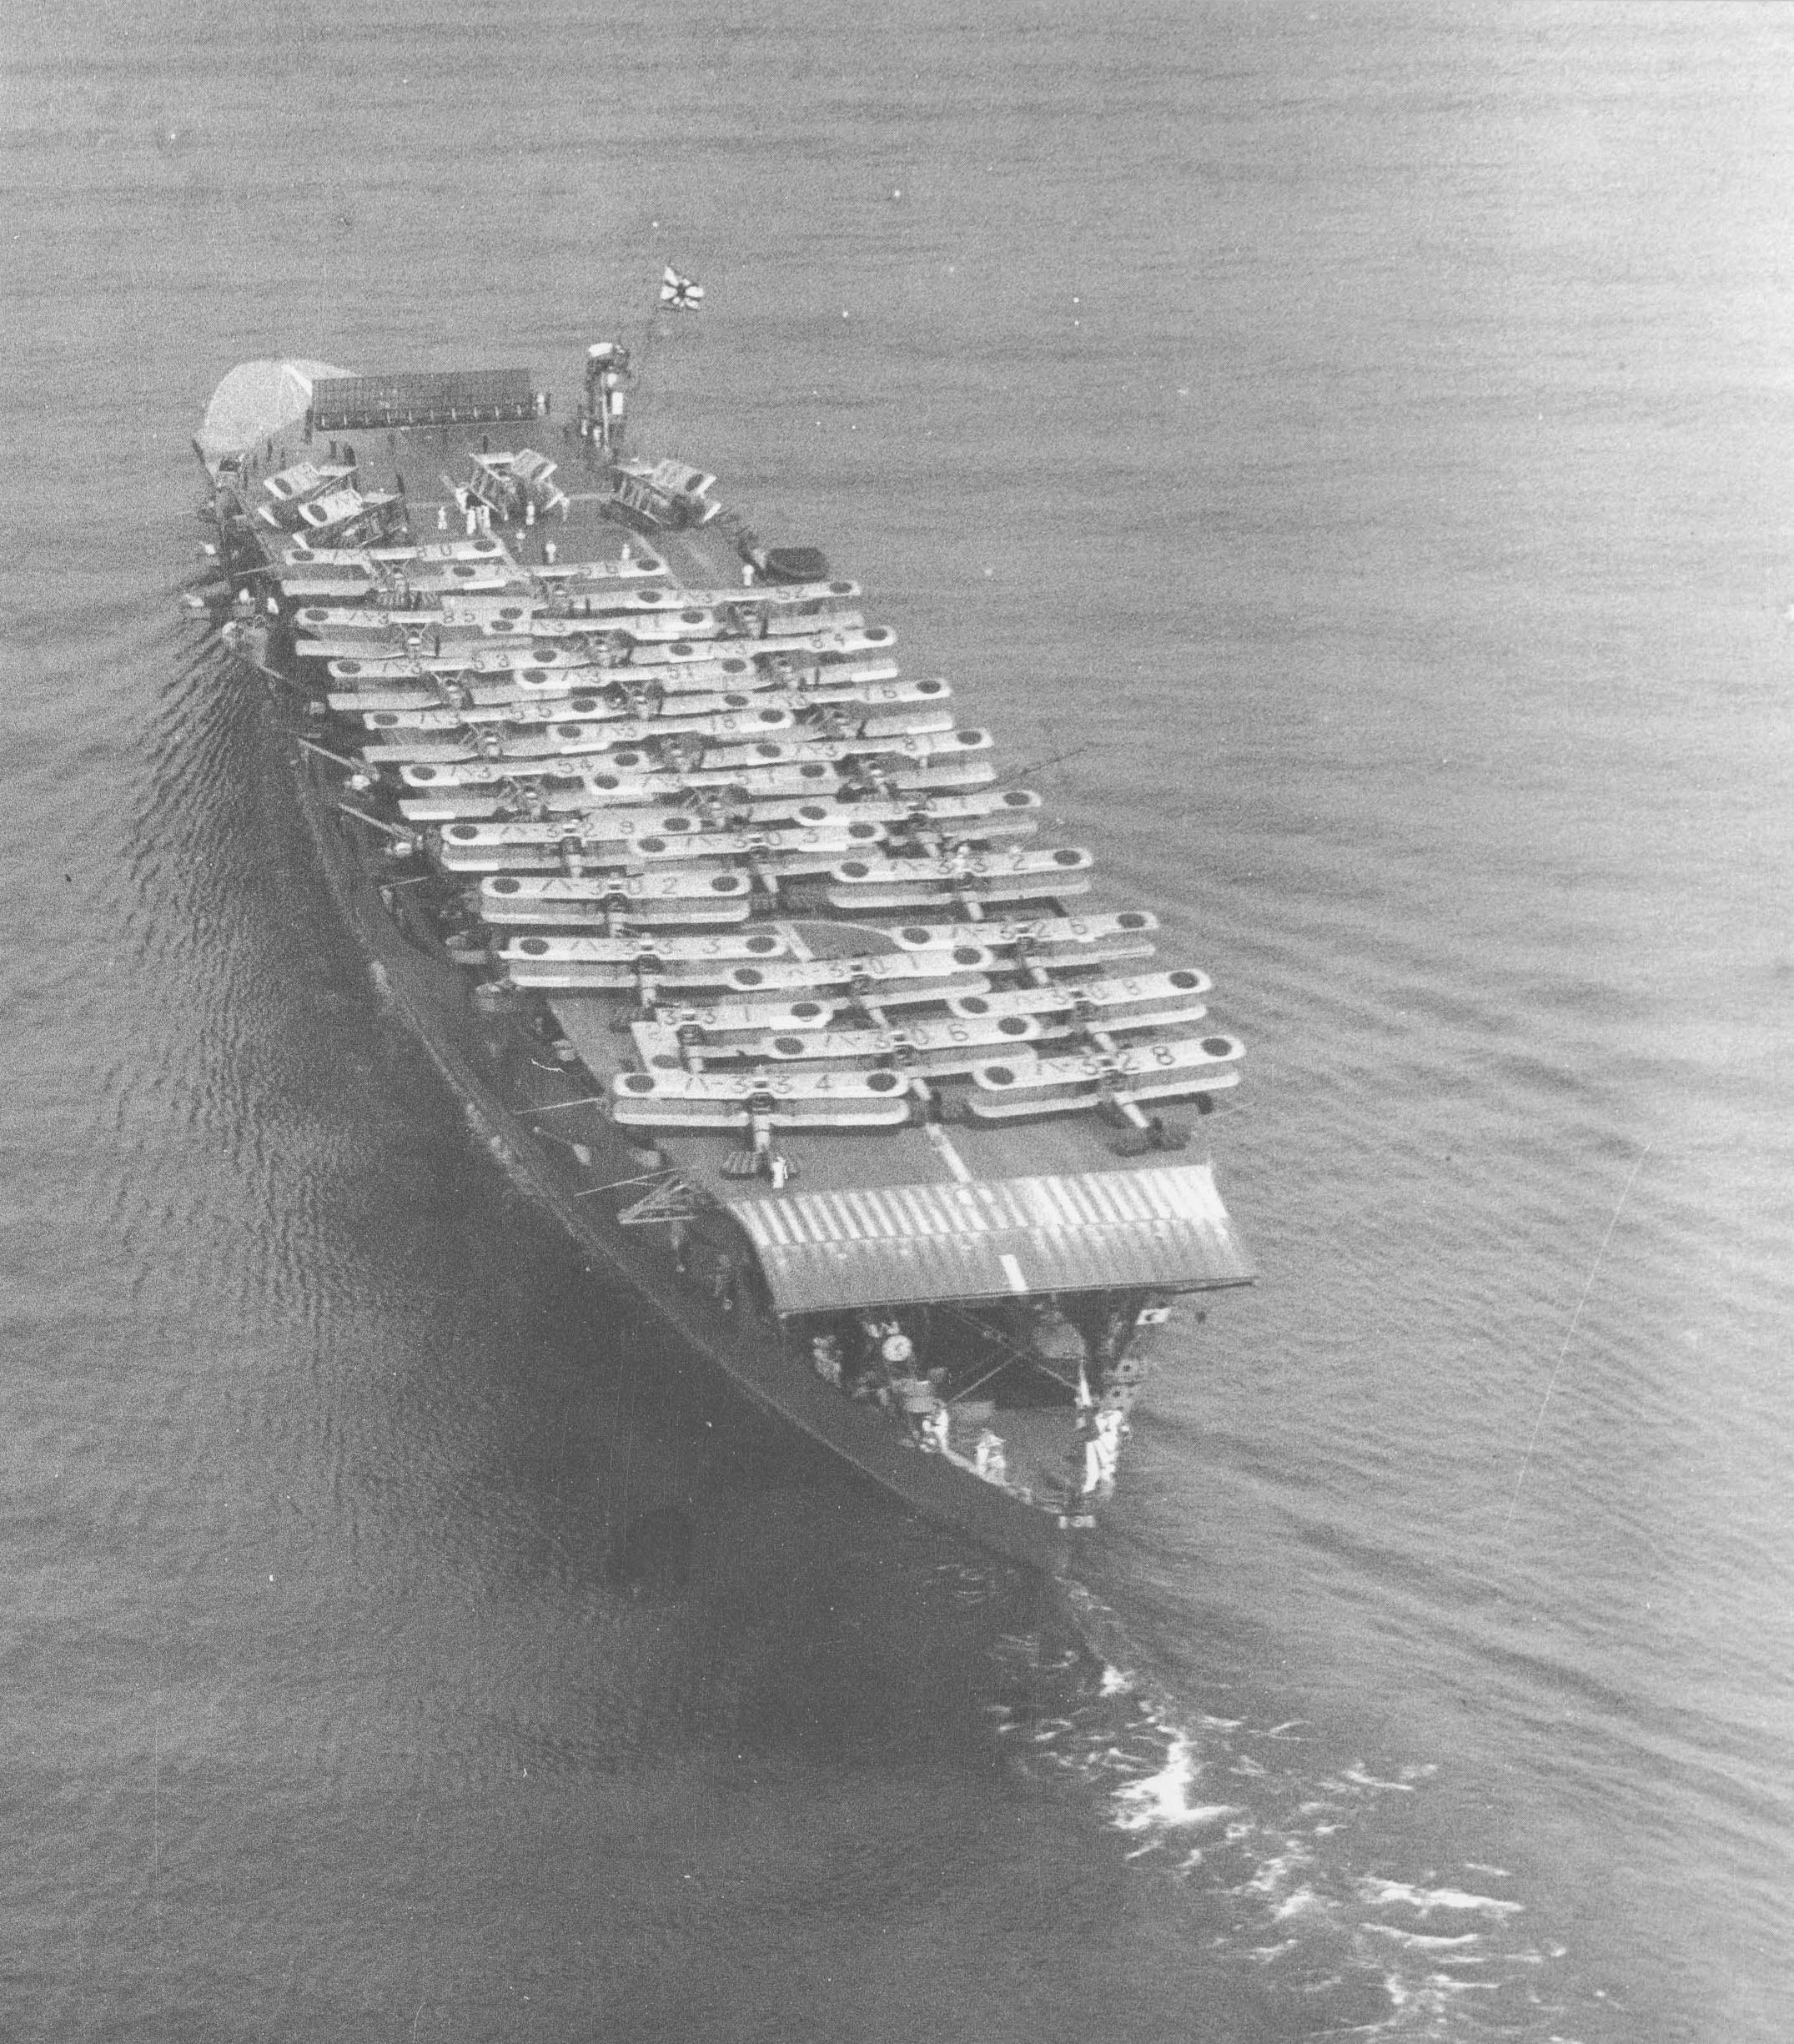 Archive Japanese Naval photo showing the Japanese aircraft carrier Akagi 01